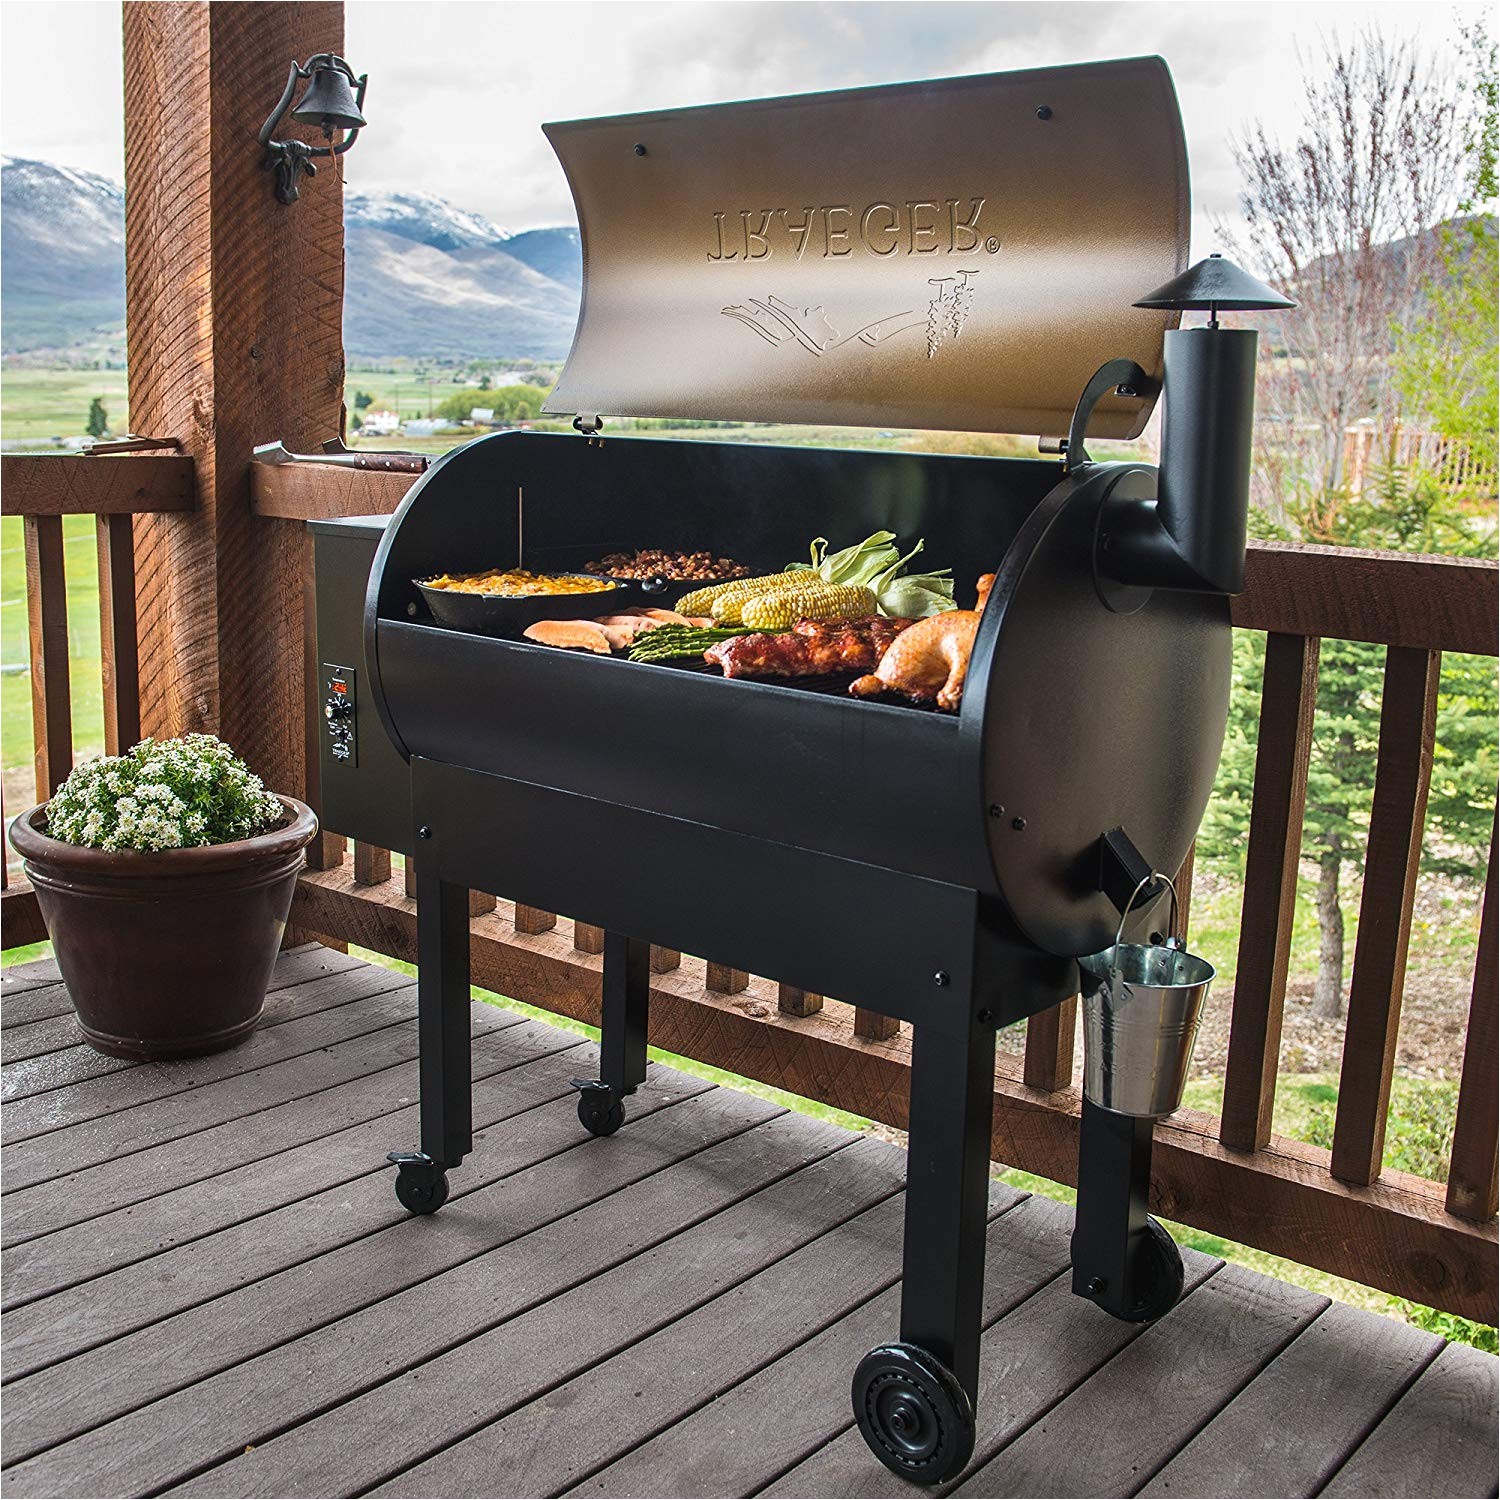 Traeger Renegade Elite Price Traeger Renegade Elite Grill Reviews Grilling Your Way to